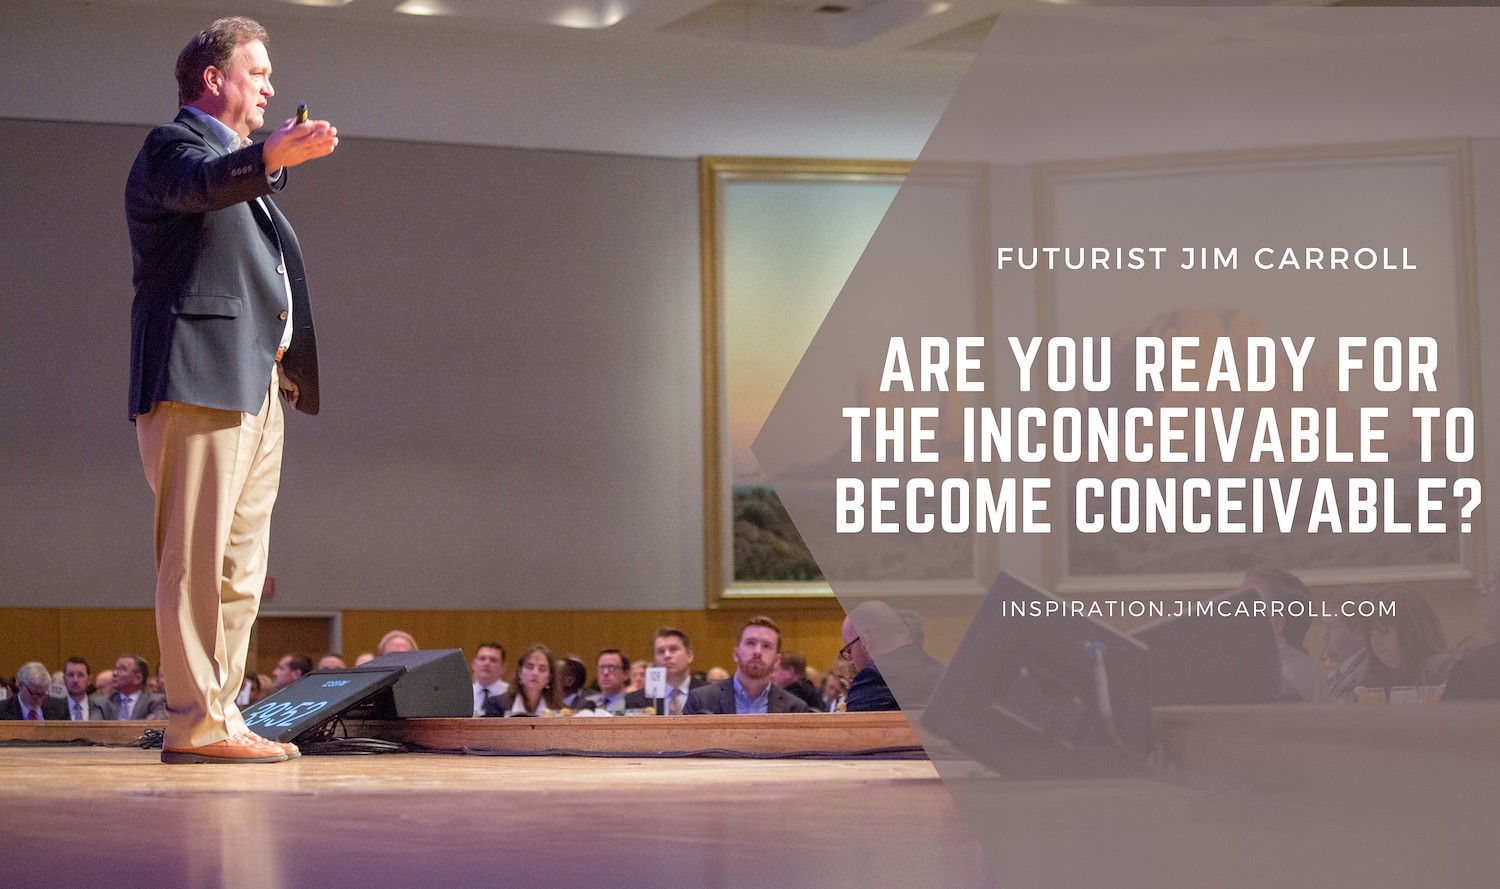 Daily inspiration: "Are you ready for the inconceivable to become conceivable?" - Futurist Jim Carroll